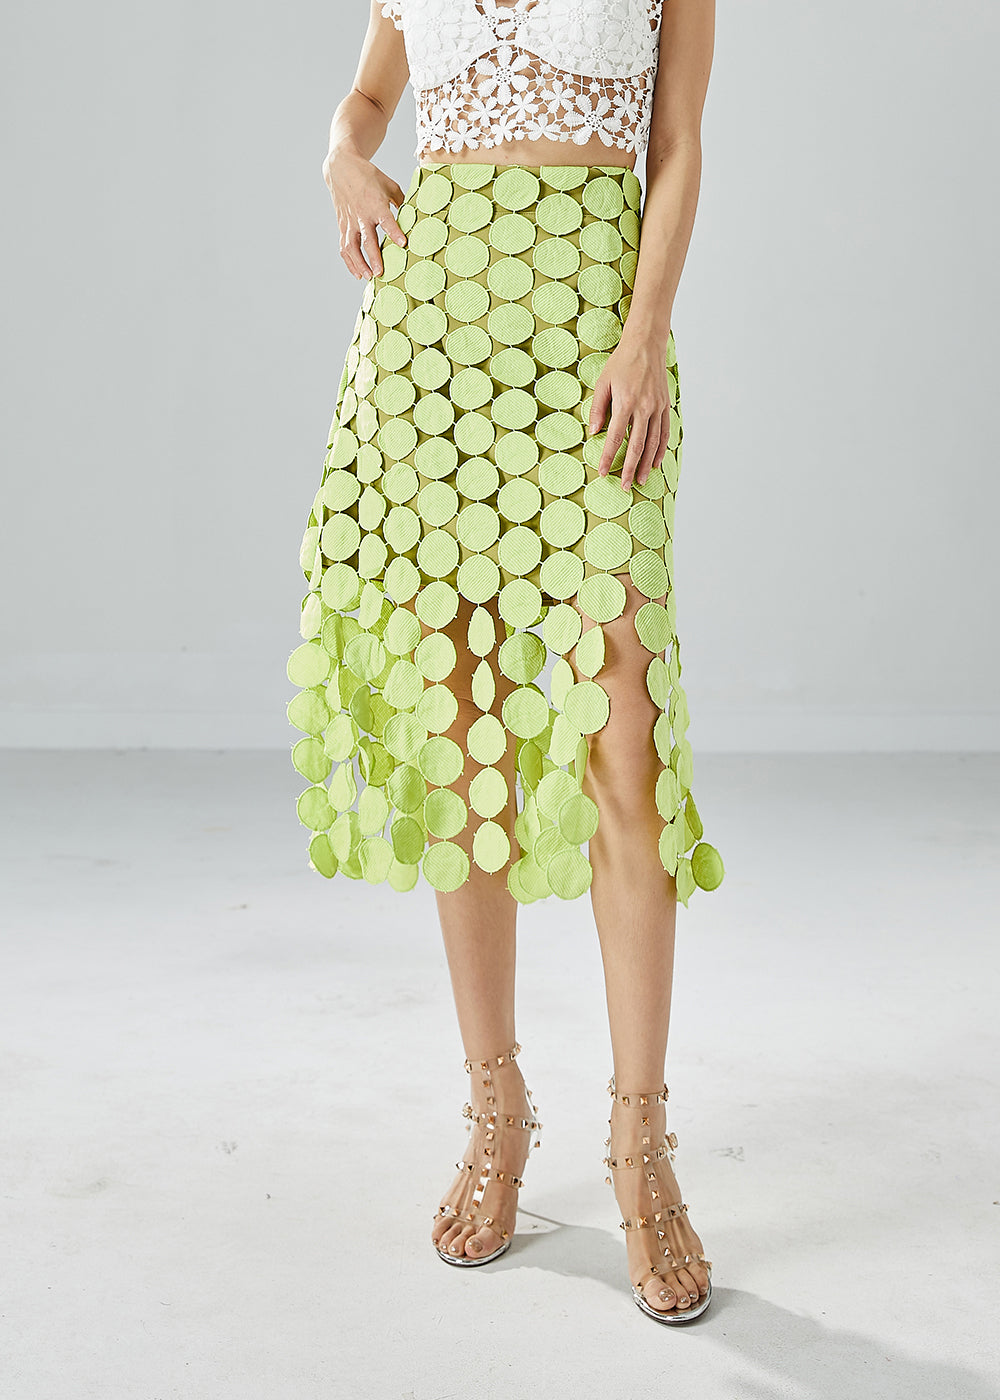 Original Design Grass Green Embroideried Circle Slim Fit Skirts Summer LY6155 - fabuloryshop